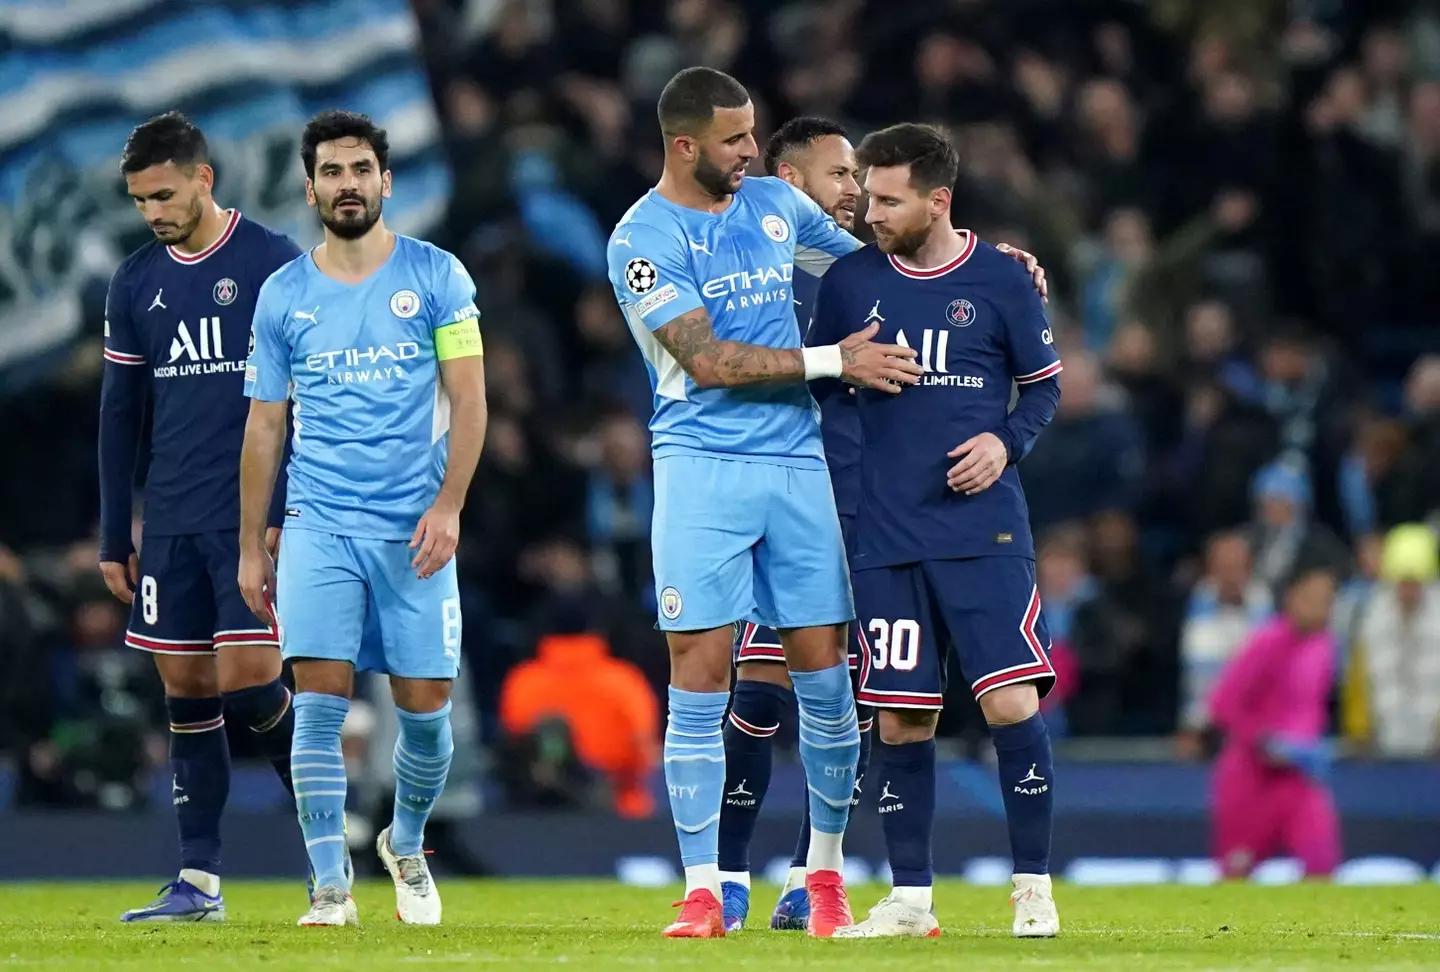 Kyle Walker and Lionel Messi embrace after a Champions League encounter. Image: Alamy